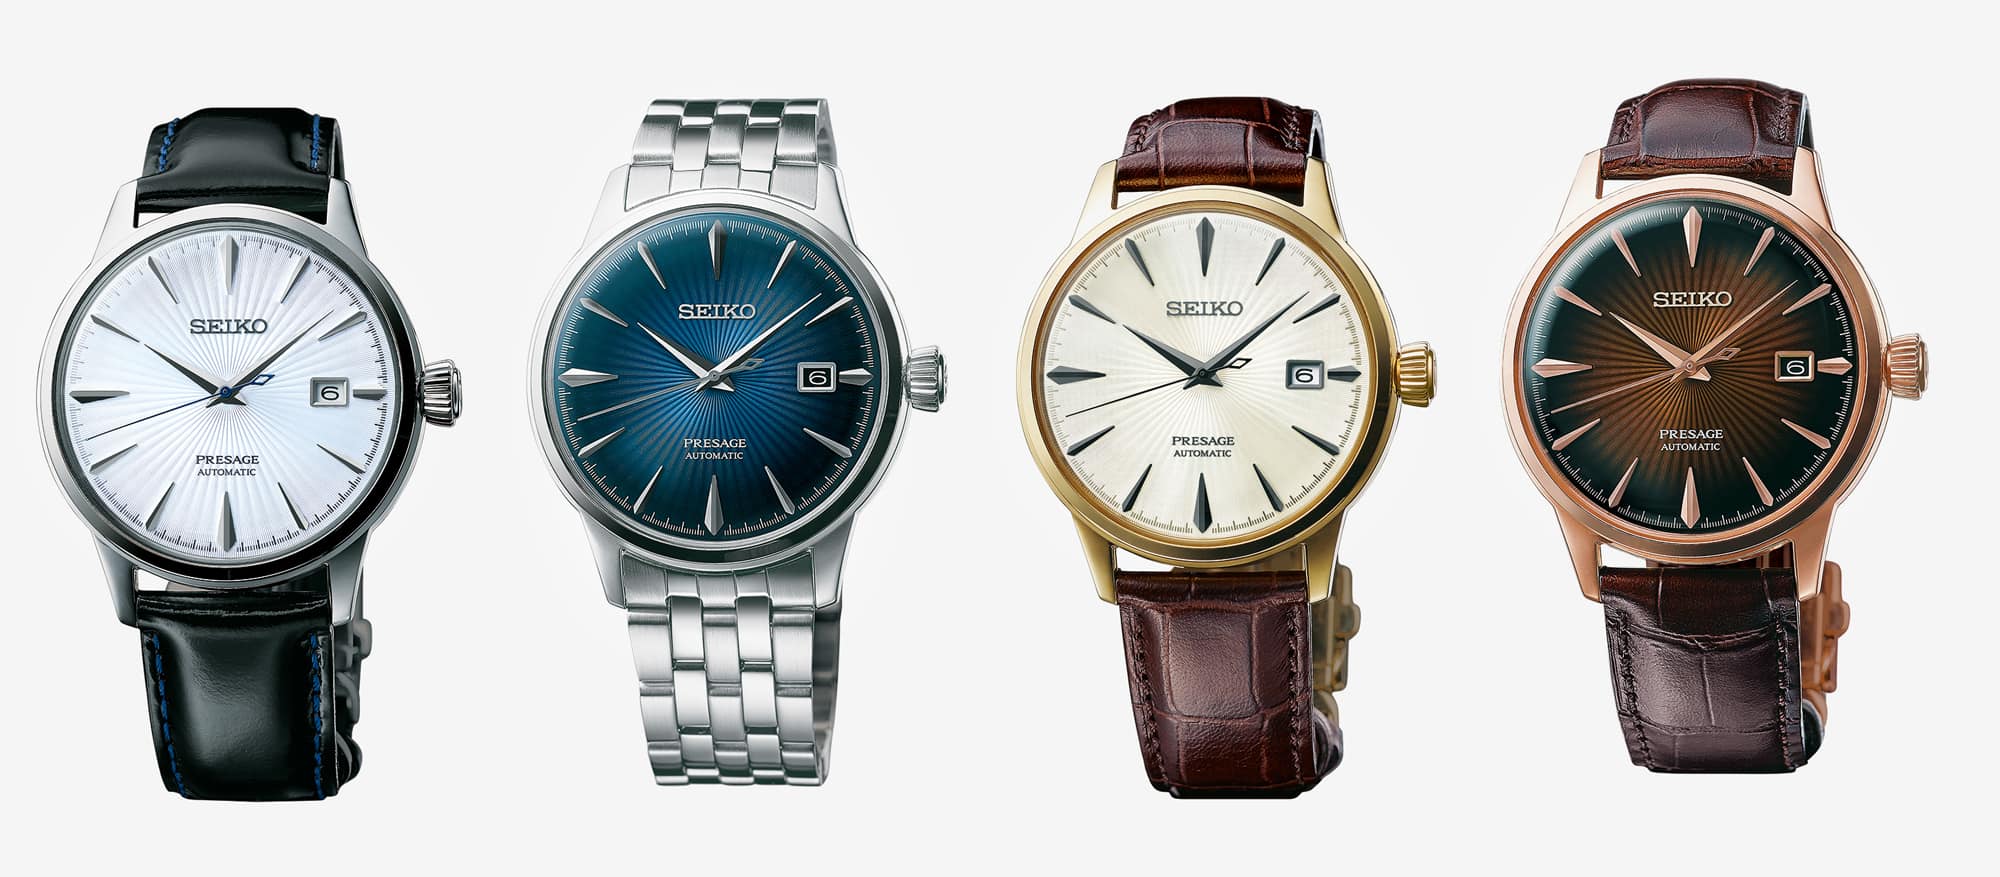 Seiko Brings the “Cocktail Time” to Presage and Expands the Line With New  Models and Colors - Worn & Wound